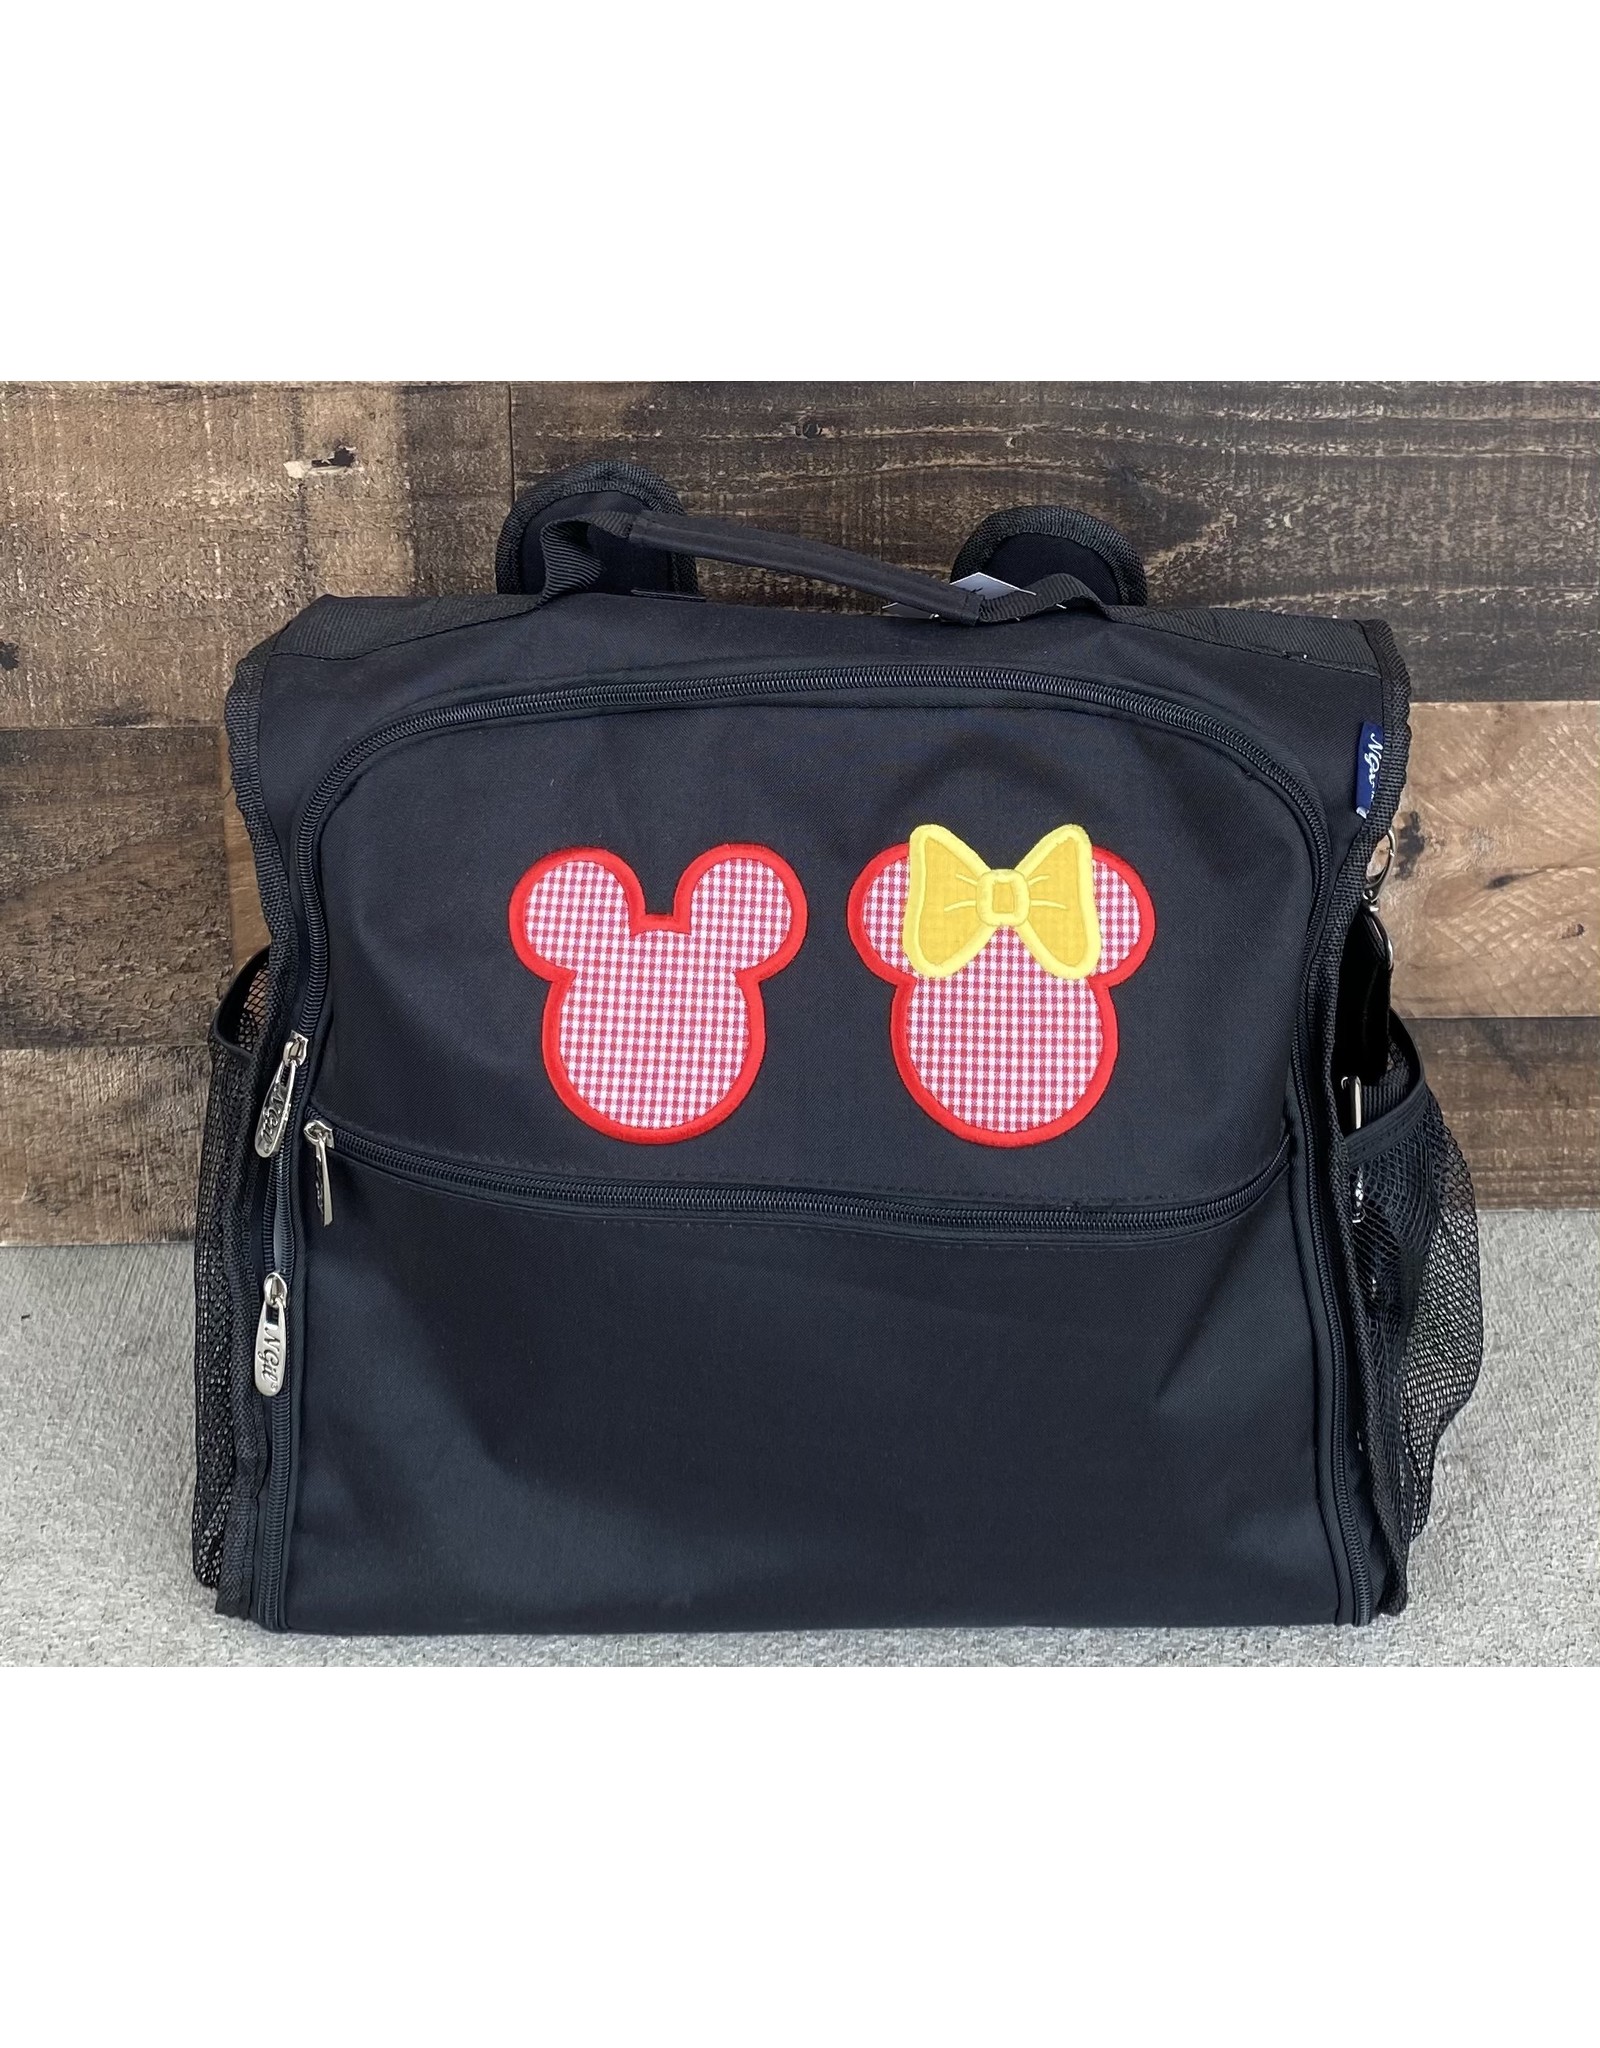 Mickey & Minnie Mouse Applique Diaper/Utility Backpack